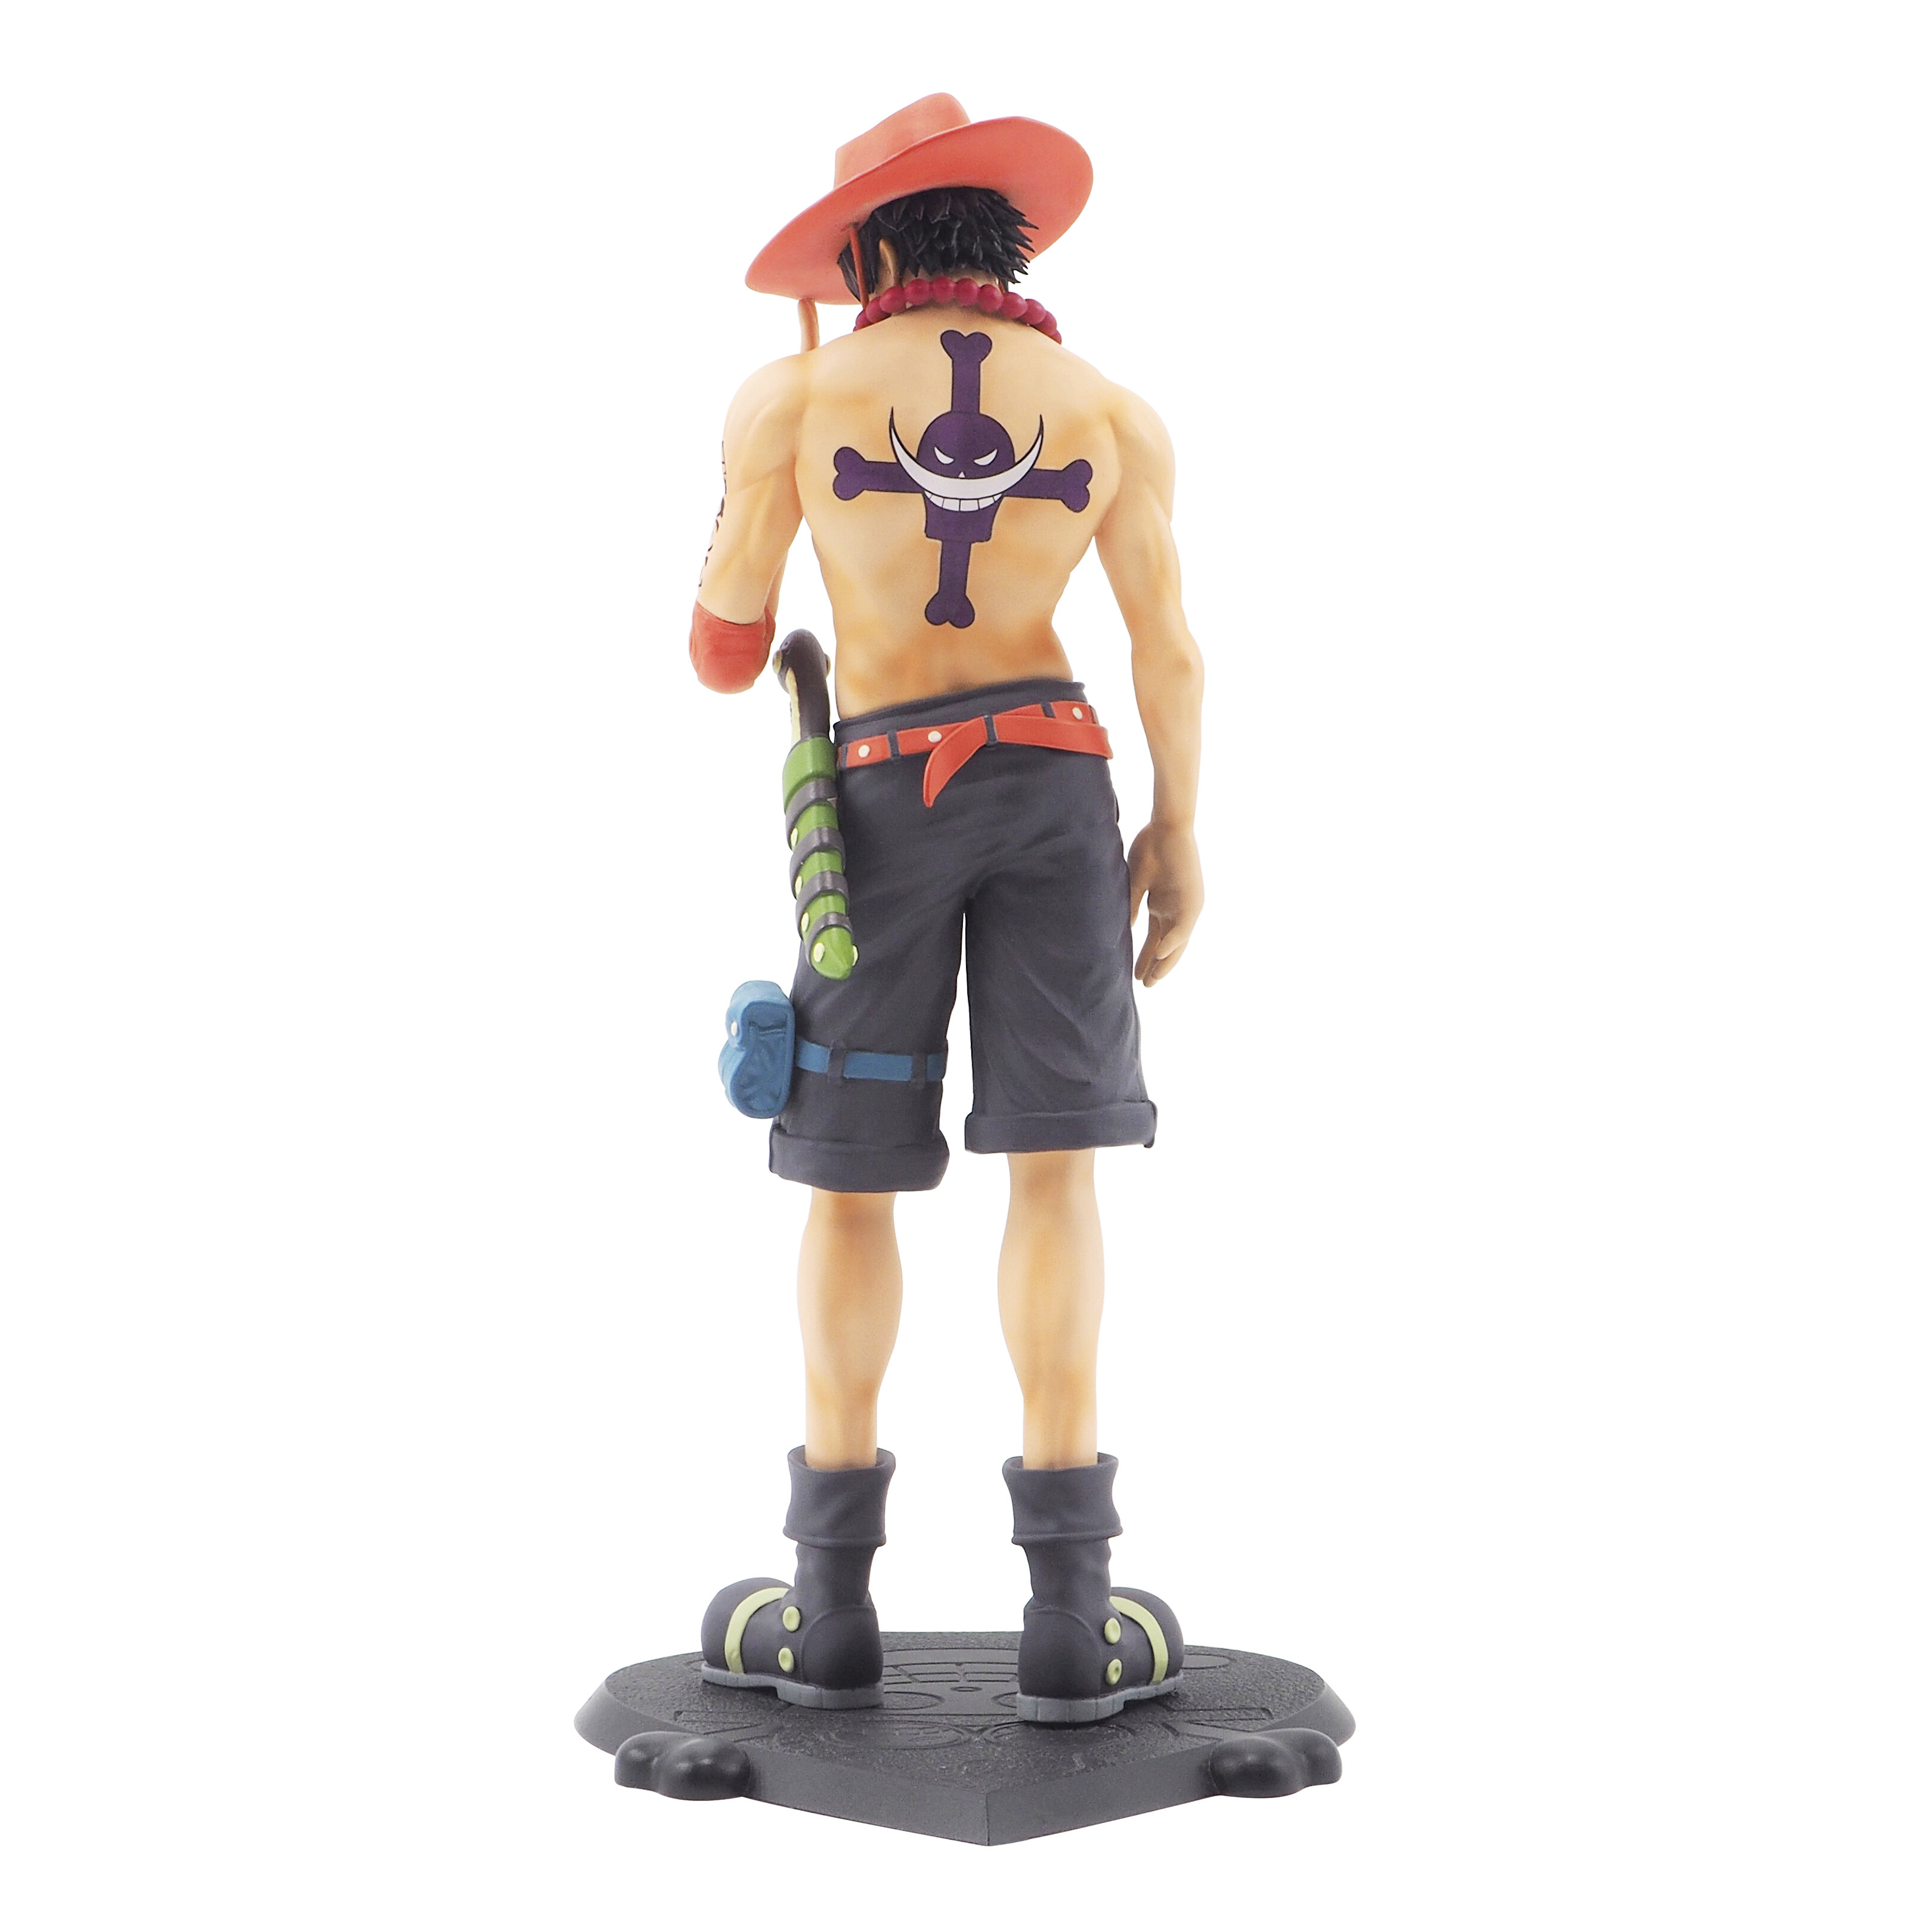 Portgas D. Ace Luffy Cowboy Hat Anime One Piece Travel Pirates Halloween Hat